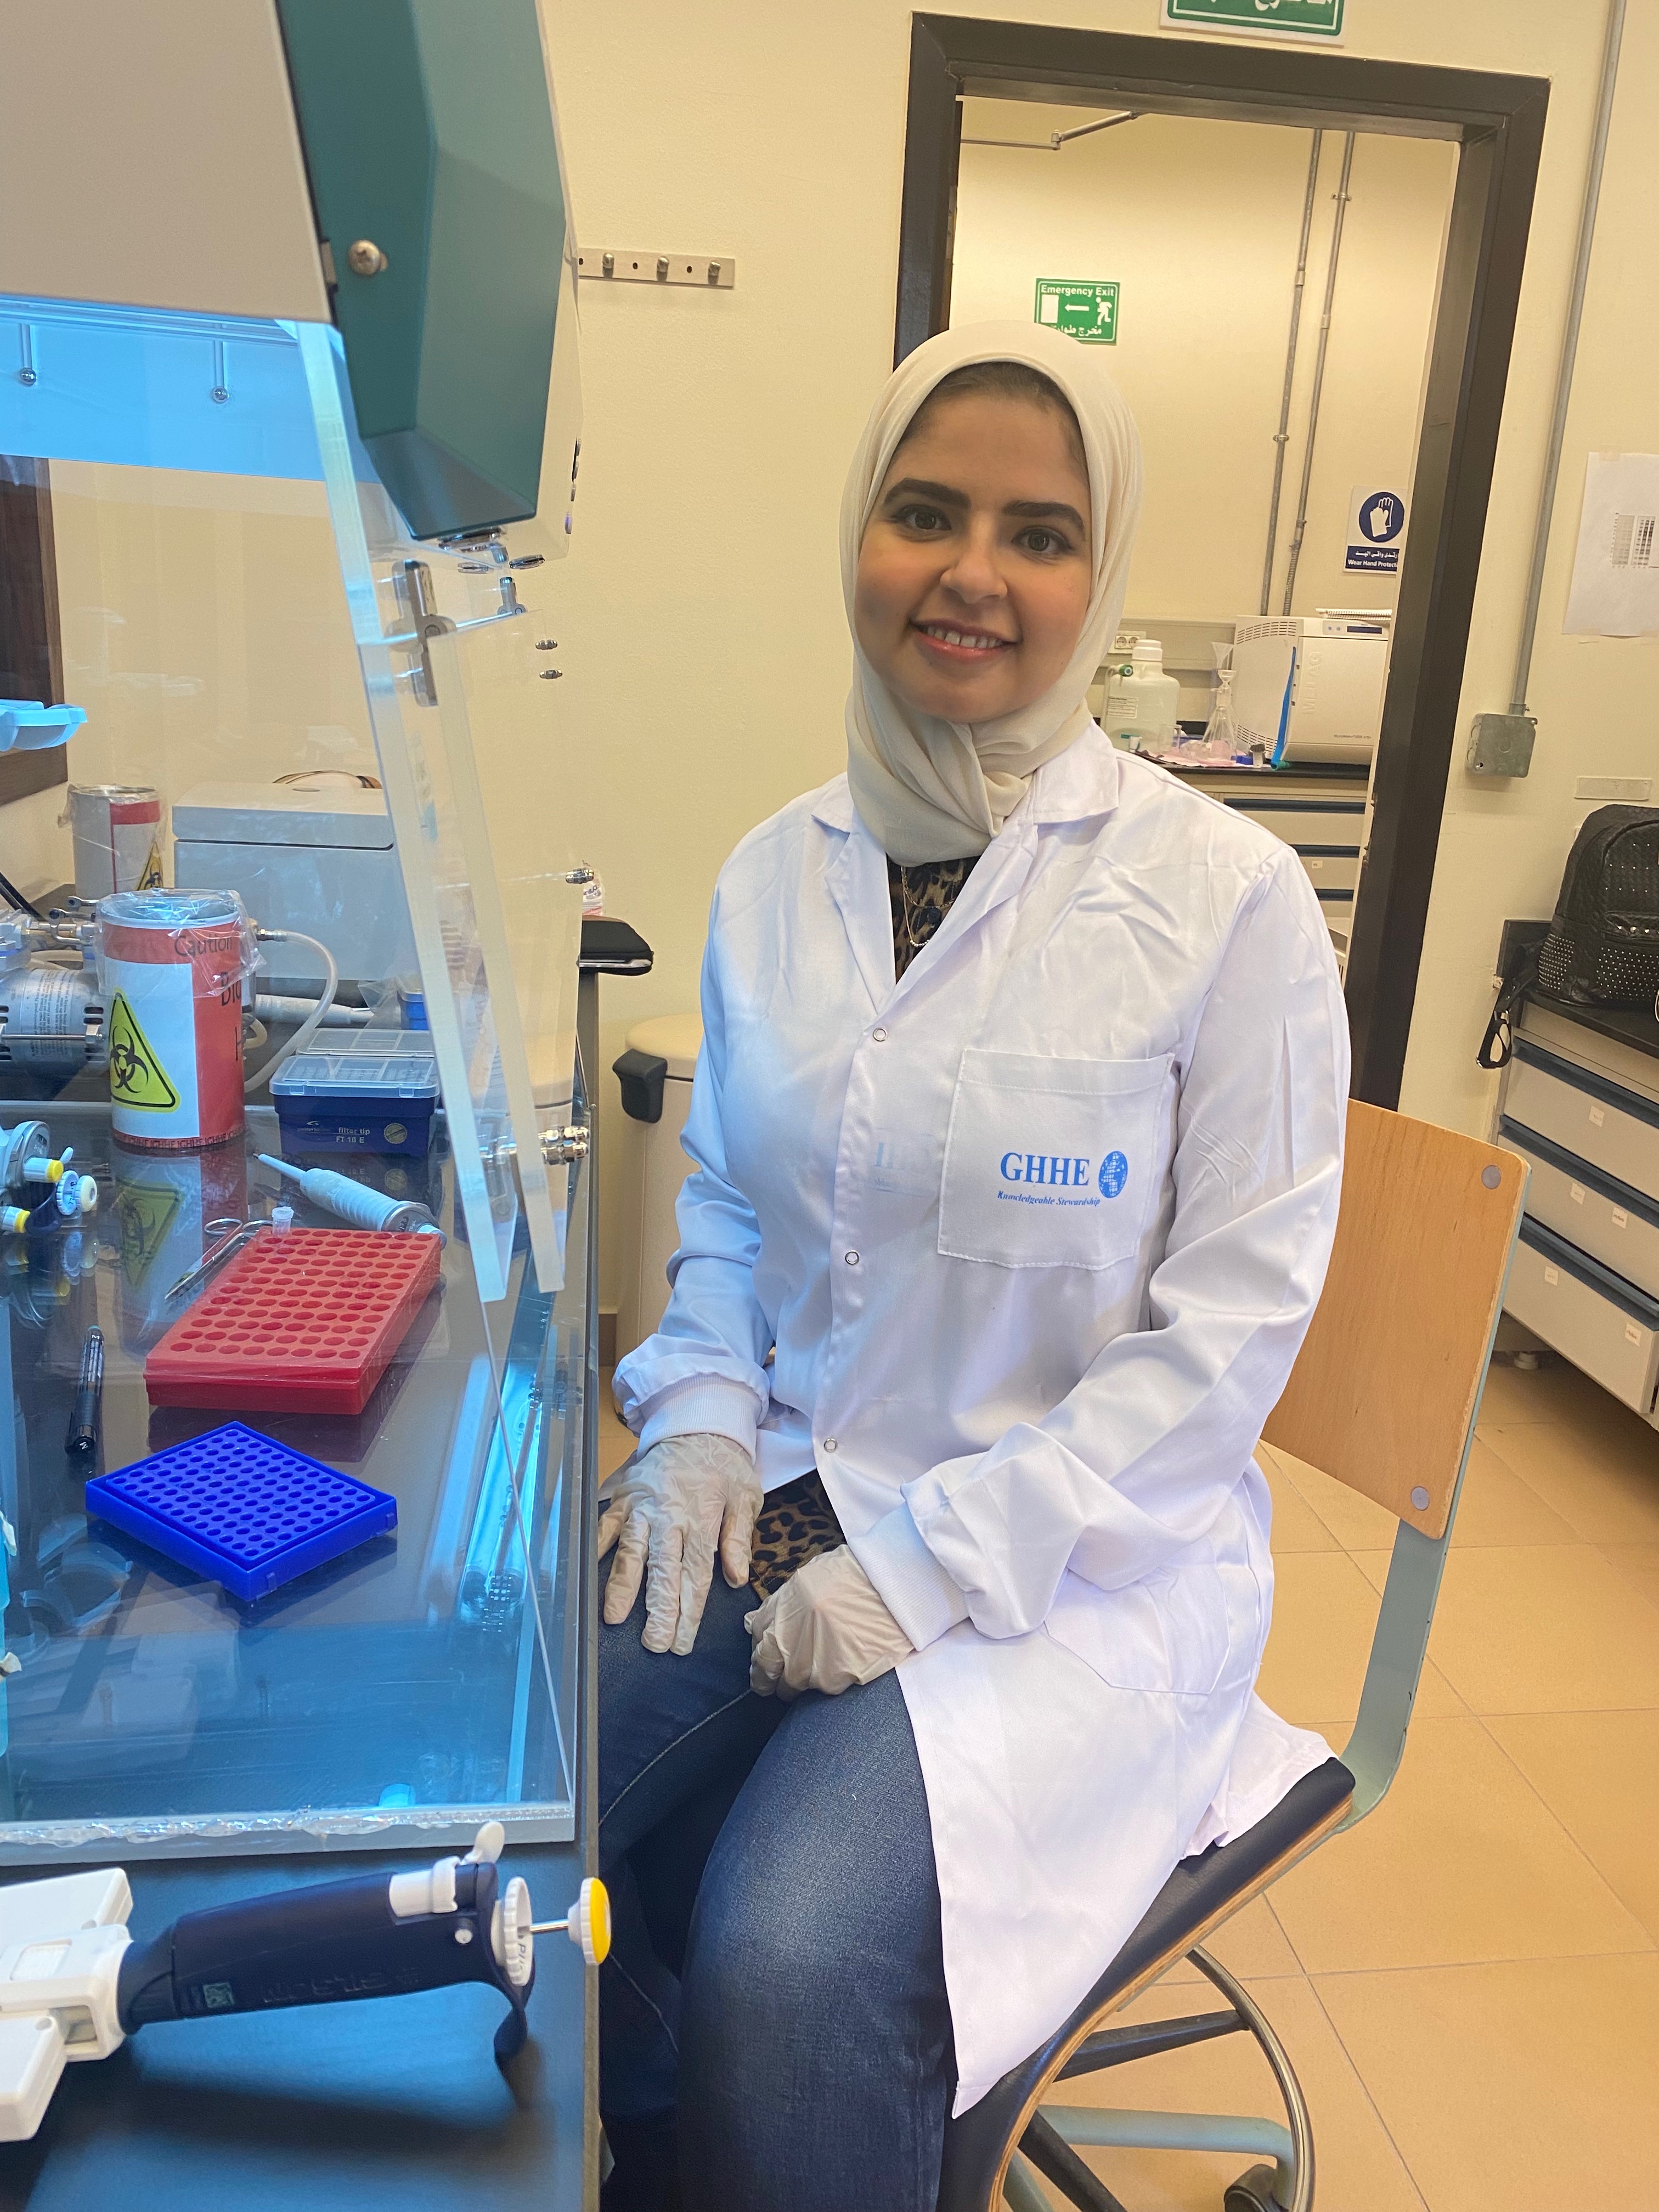 Heikal Conducts Research at AUC